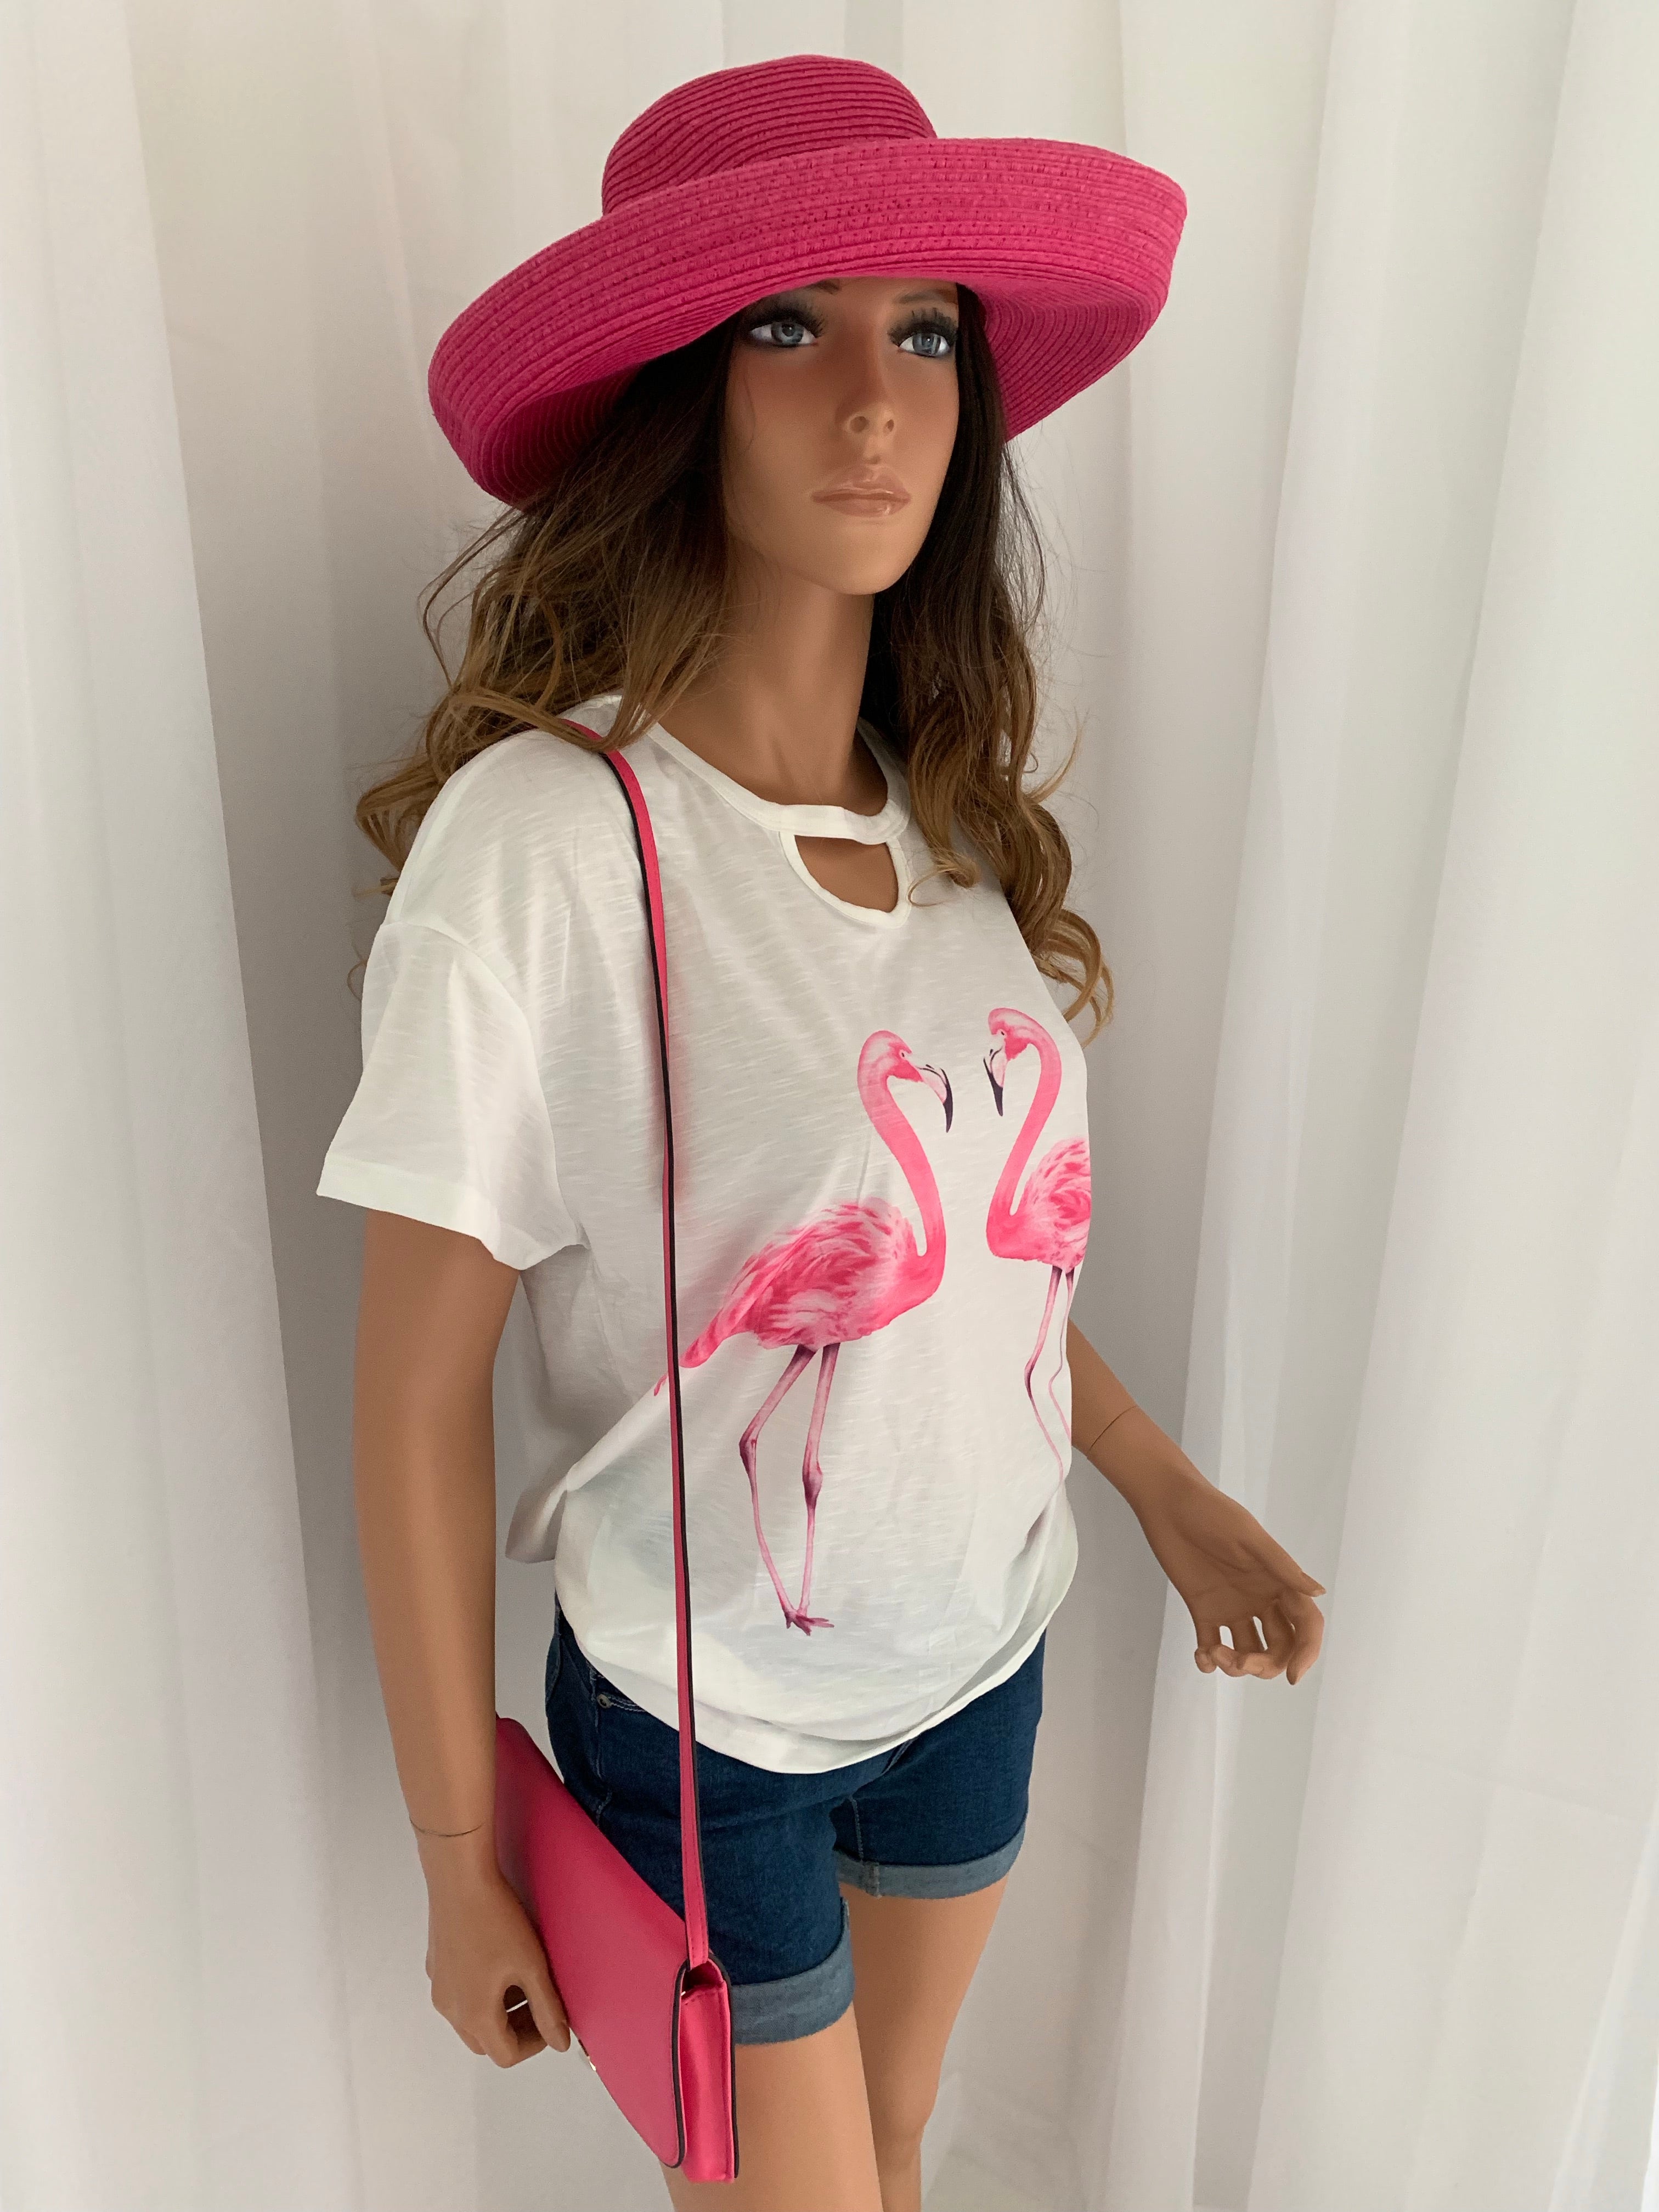 Super cute white tee with pink flamingos  •Chic hollow-out neck  •Crew neck  •Short sleeves  •Front flamingos print  •Classic tee fit  Note: Not a very stretchy material and is a nice  cotton blend fabric 